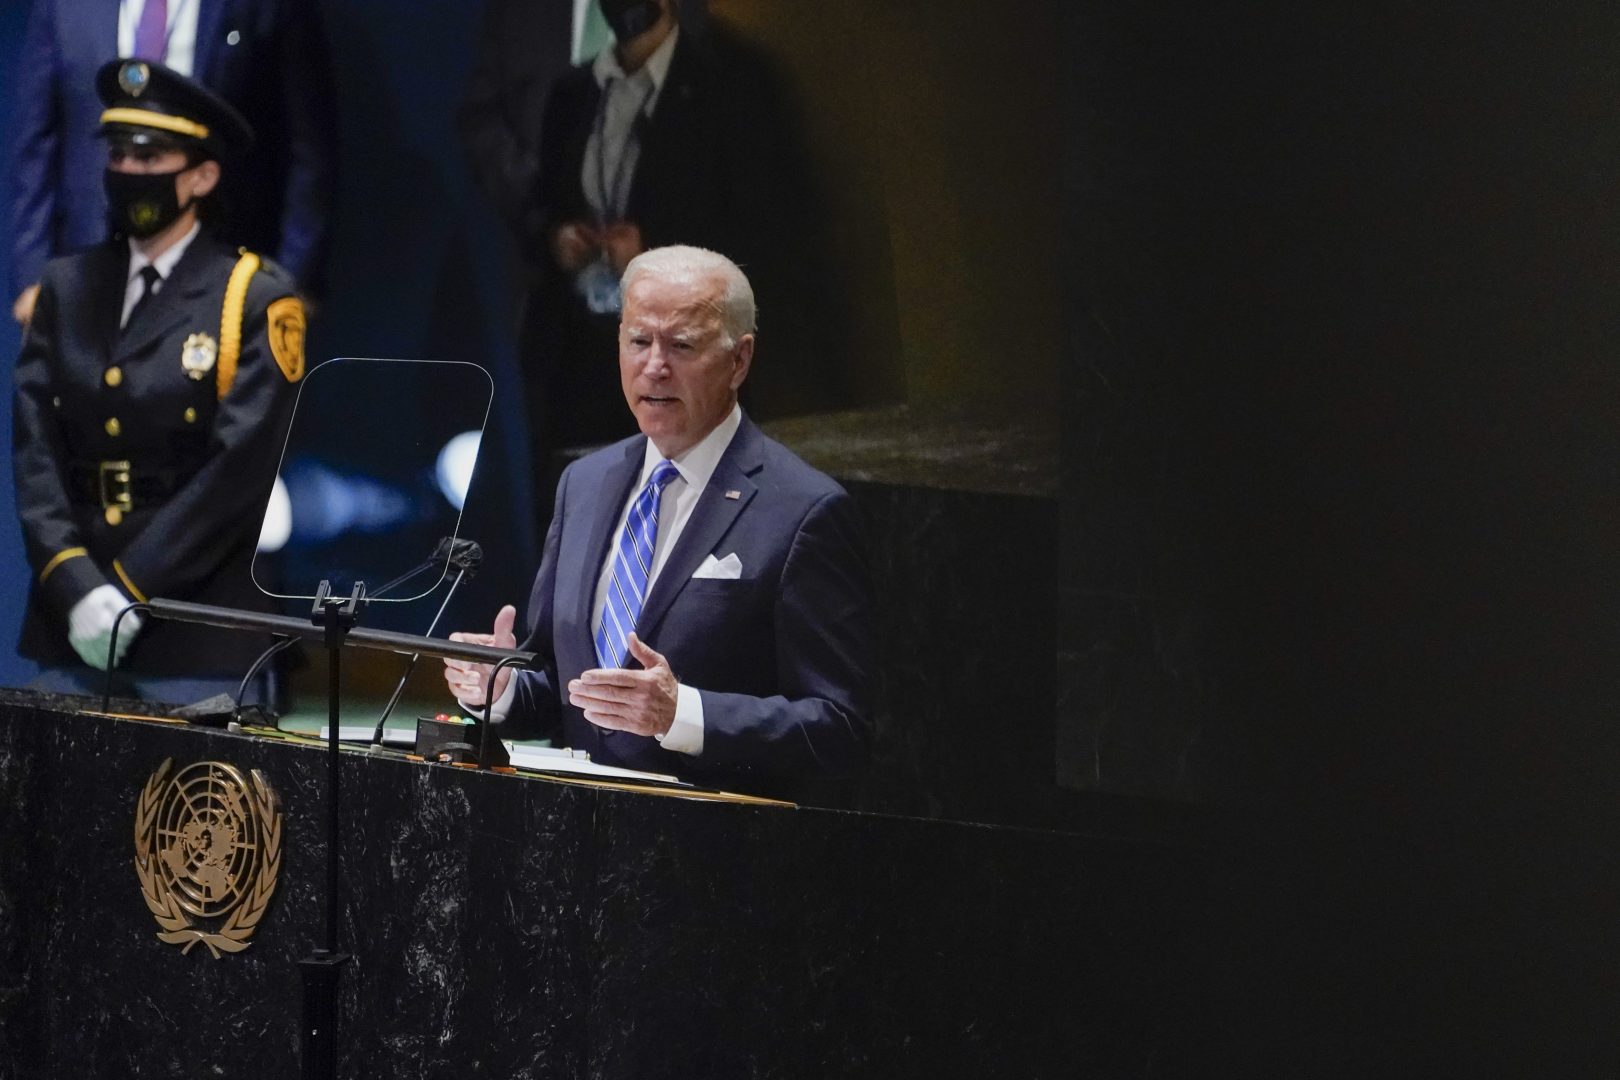 President Joe Biden delivers remarks to the 76th Session of the United Nations General Assembly, Tuesday, Sept. 21, 2021, in New York.